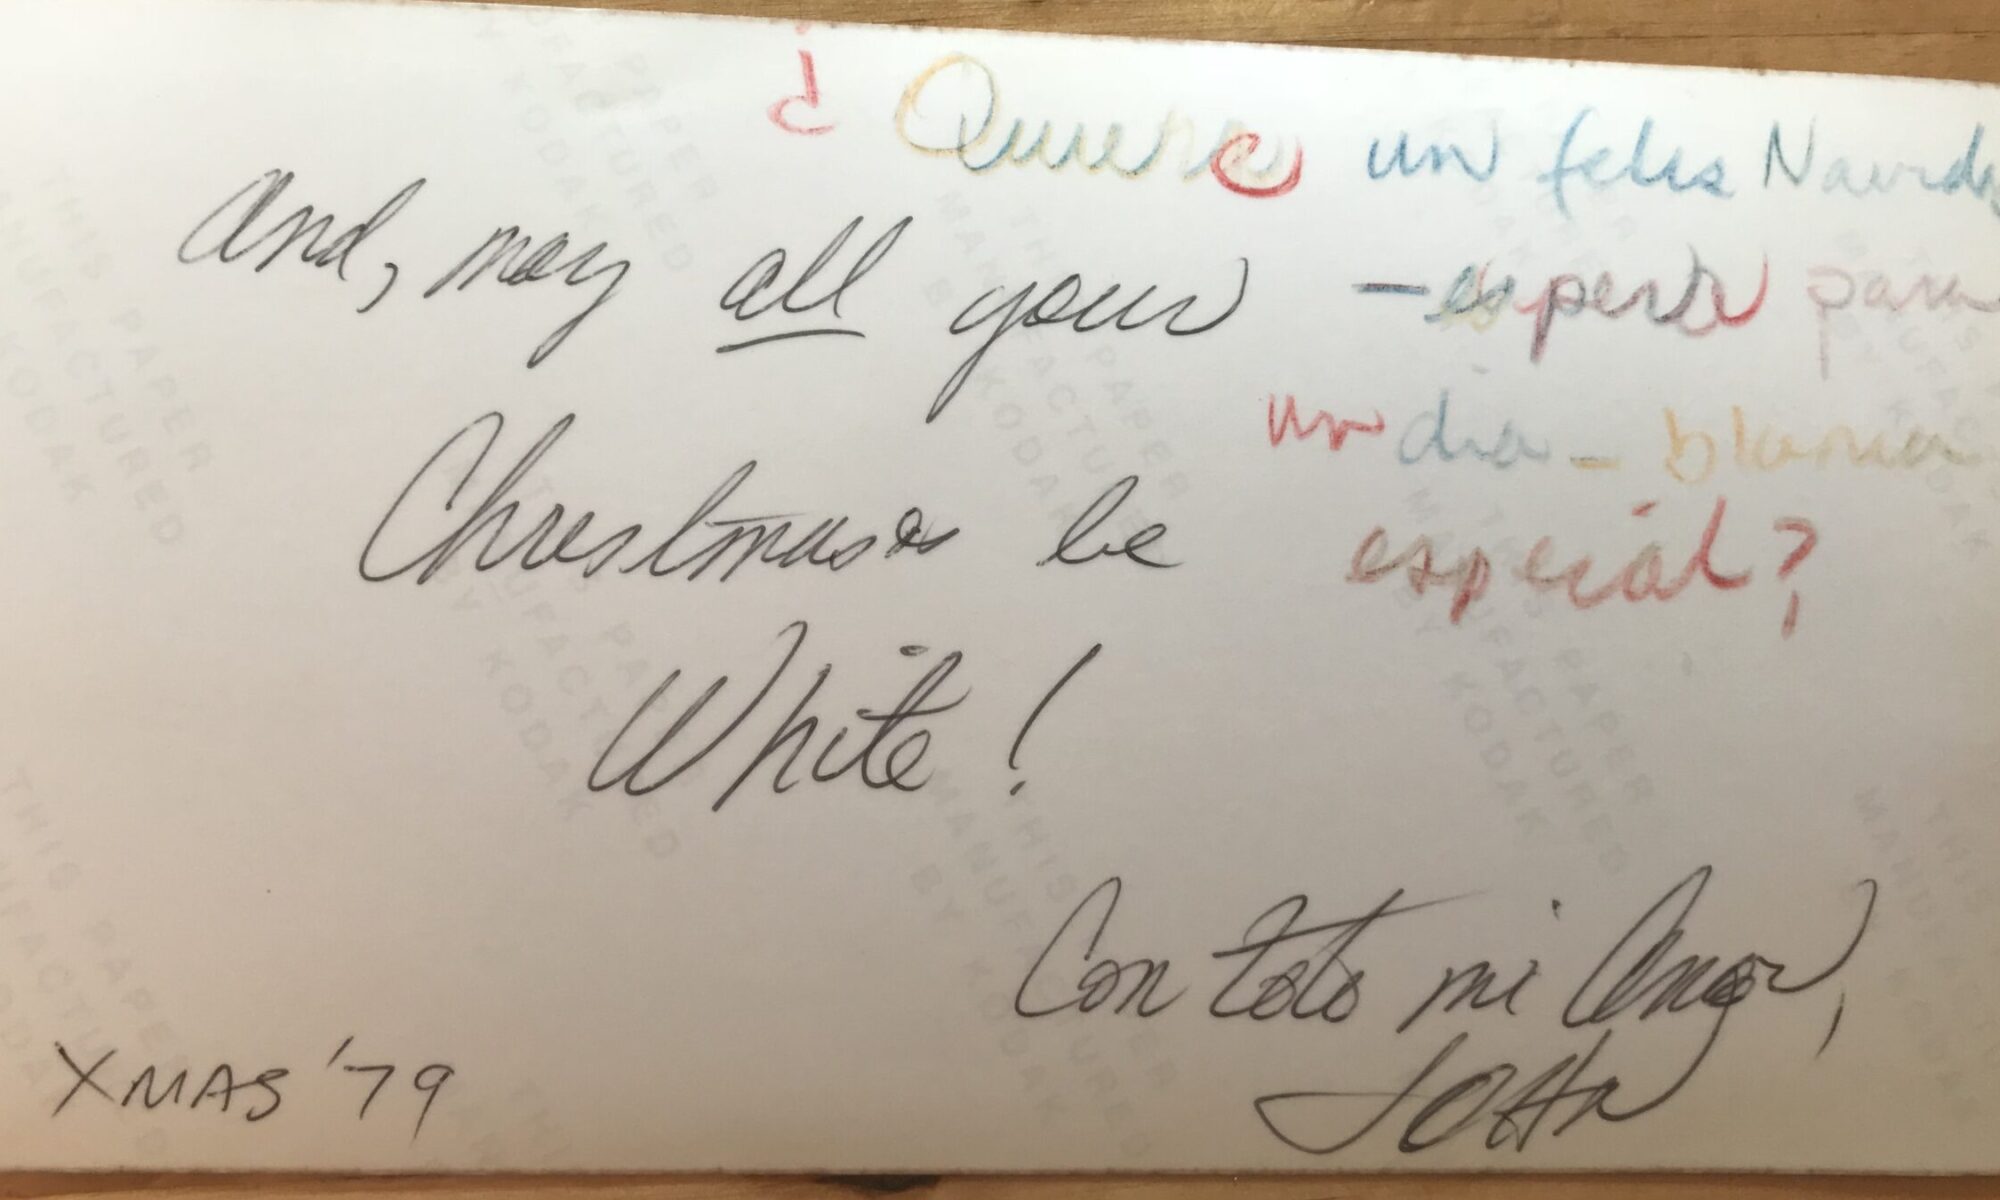 The back of a postcard from "XMAS '79" reads, "And, may *all* your Christmases be White!" in black ink, next to its Spanish translation written in four different colors. It's signed, "Con tito mi Amor, JOHN."